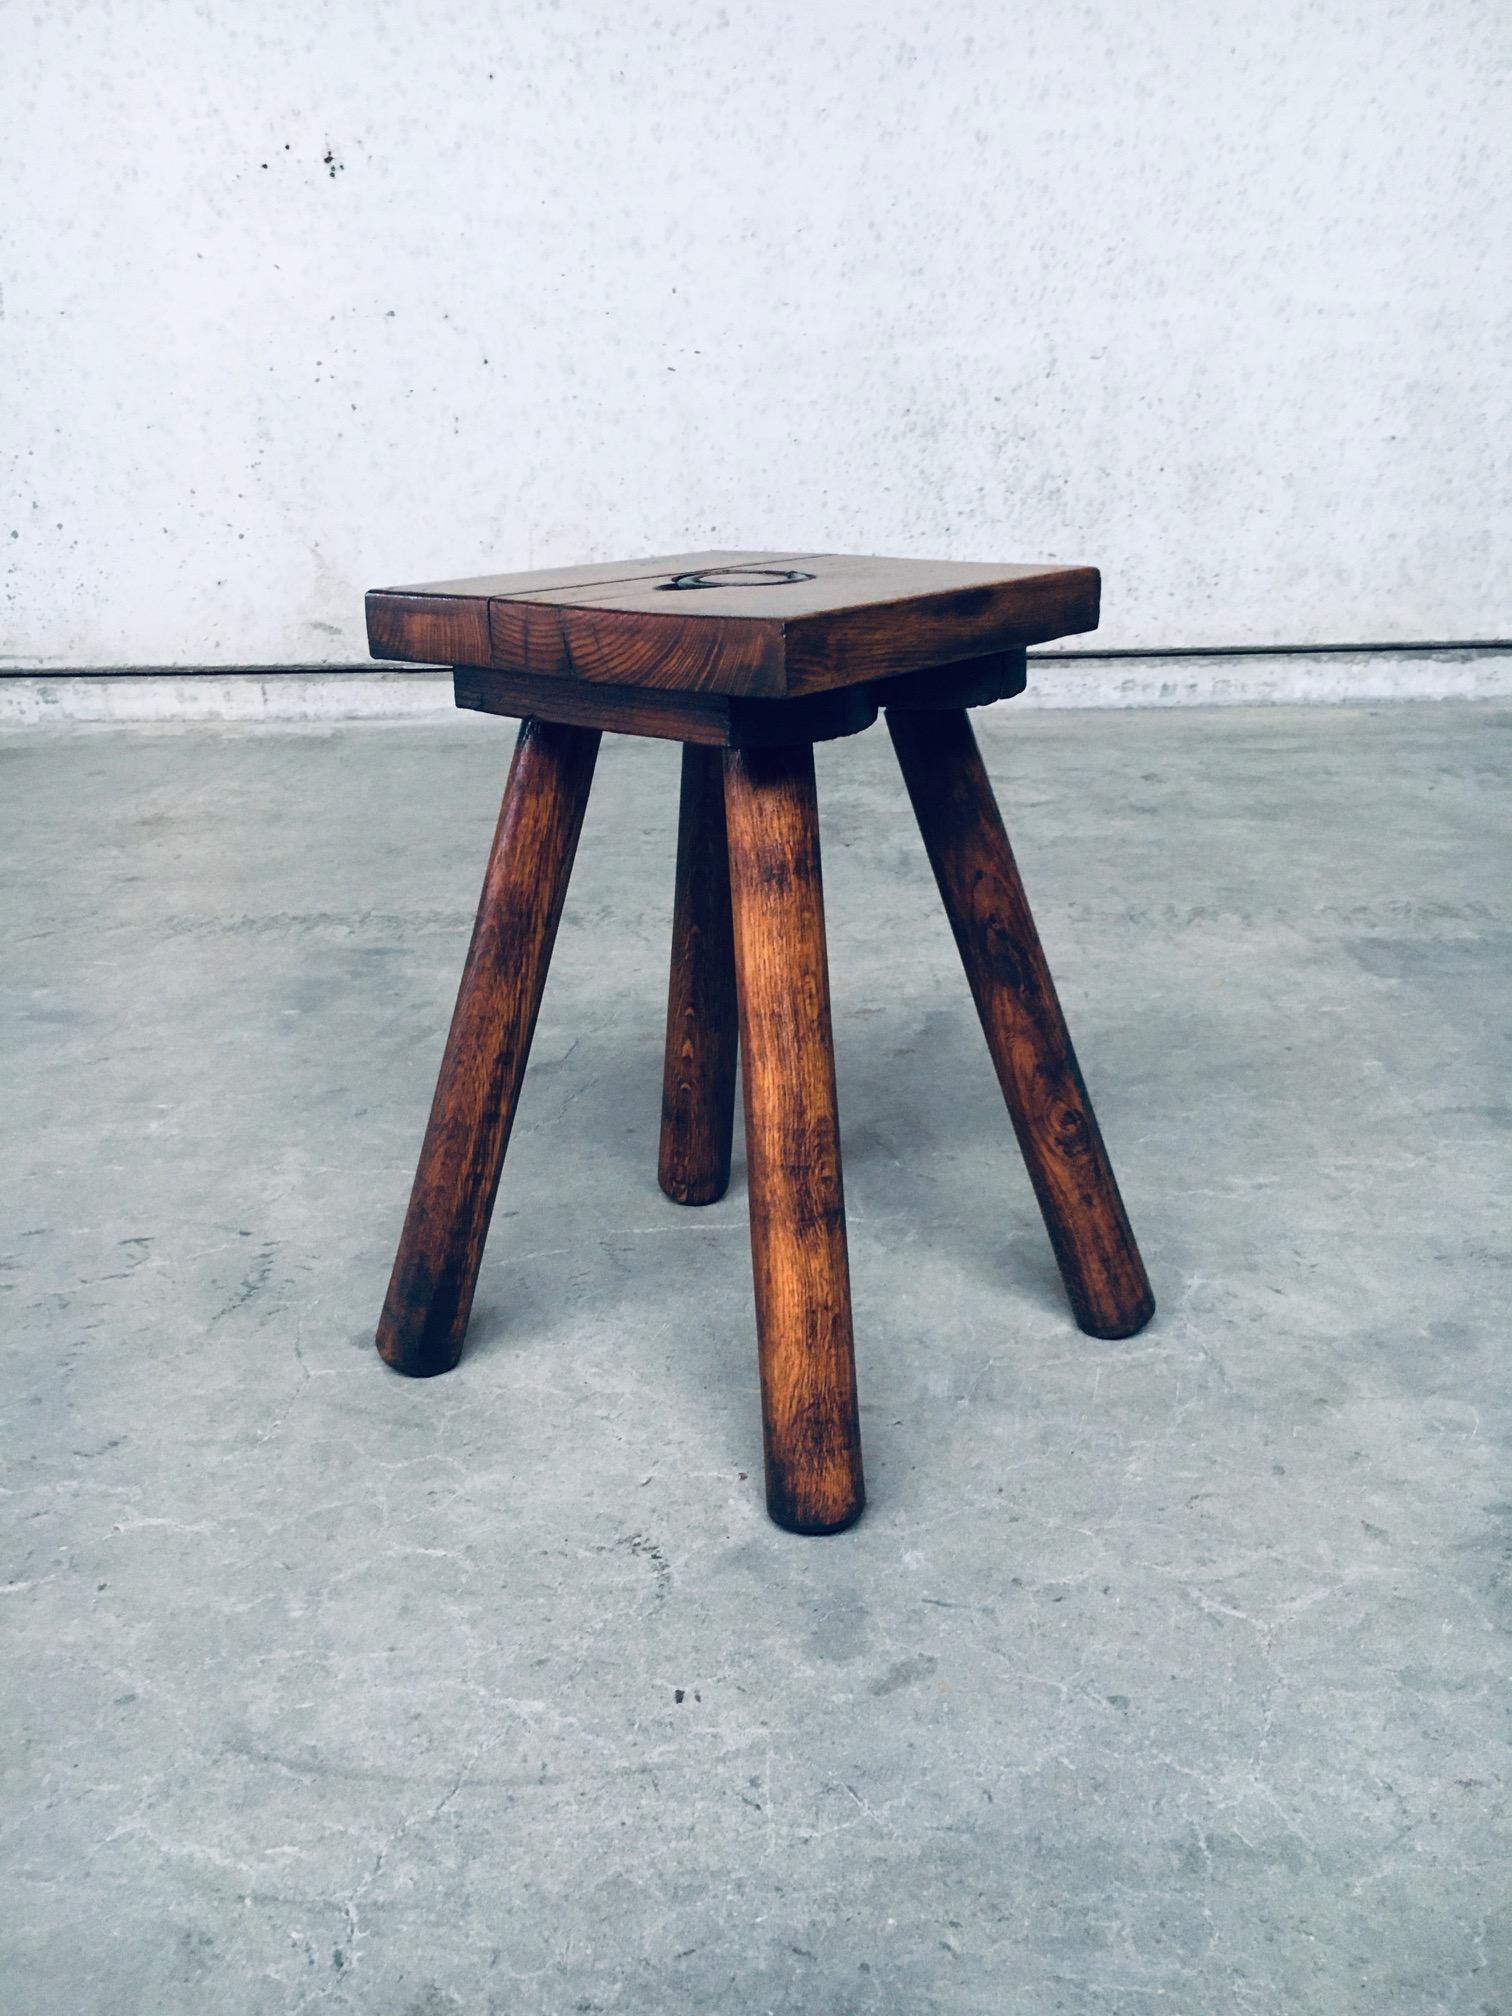 Vintage mid-century rustic Brutalist Wabi Sabi style design oak stool with metal ring handle, made in Belgium in the 1950's. Solid oak handmade constructed stool with 4 legs and metal hinged ring. In very good condition. Has been refinished; sanded,